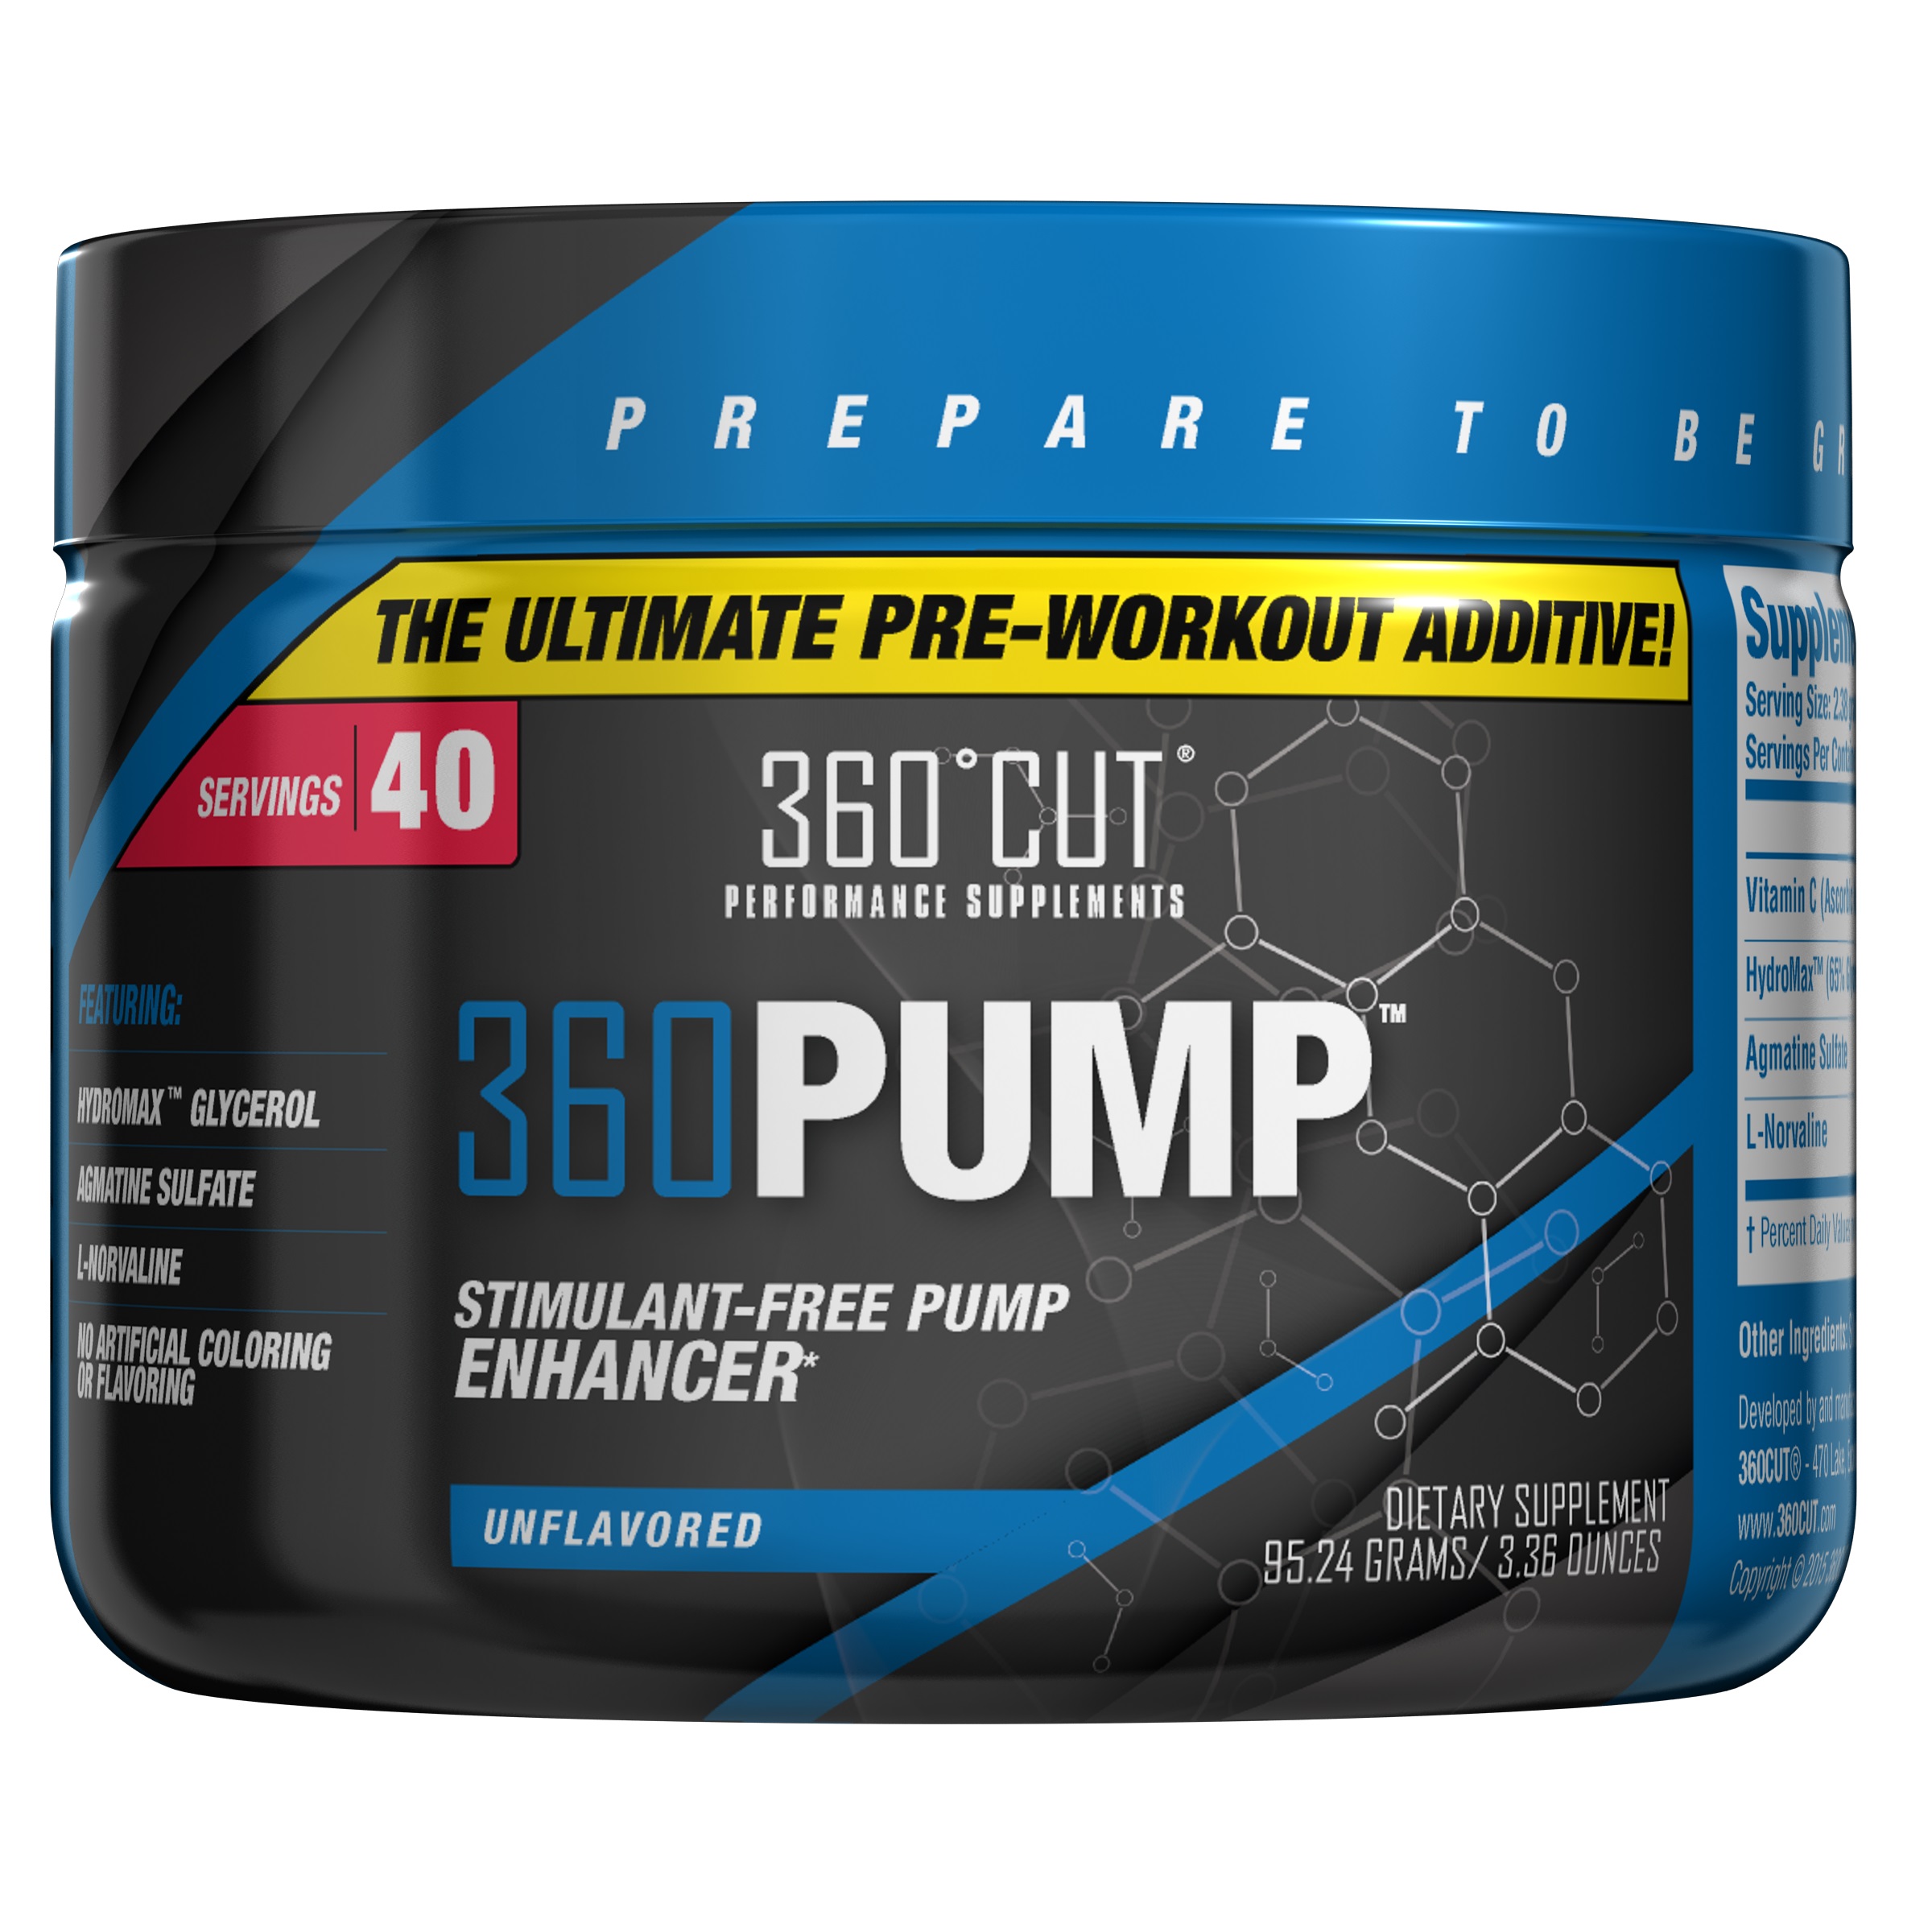 30 Minute Pure pump pre workout for push your ABS